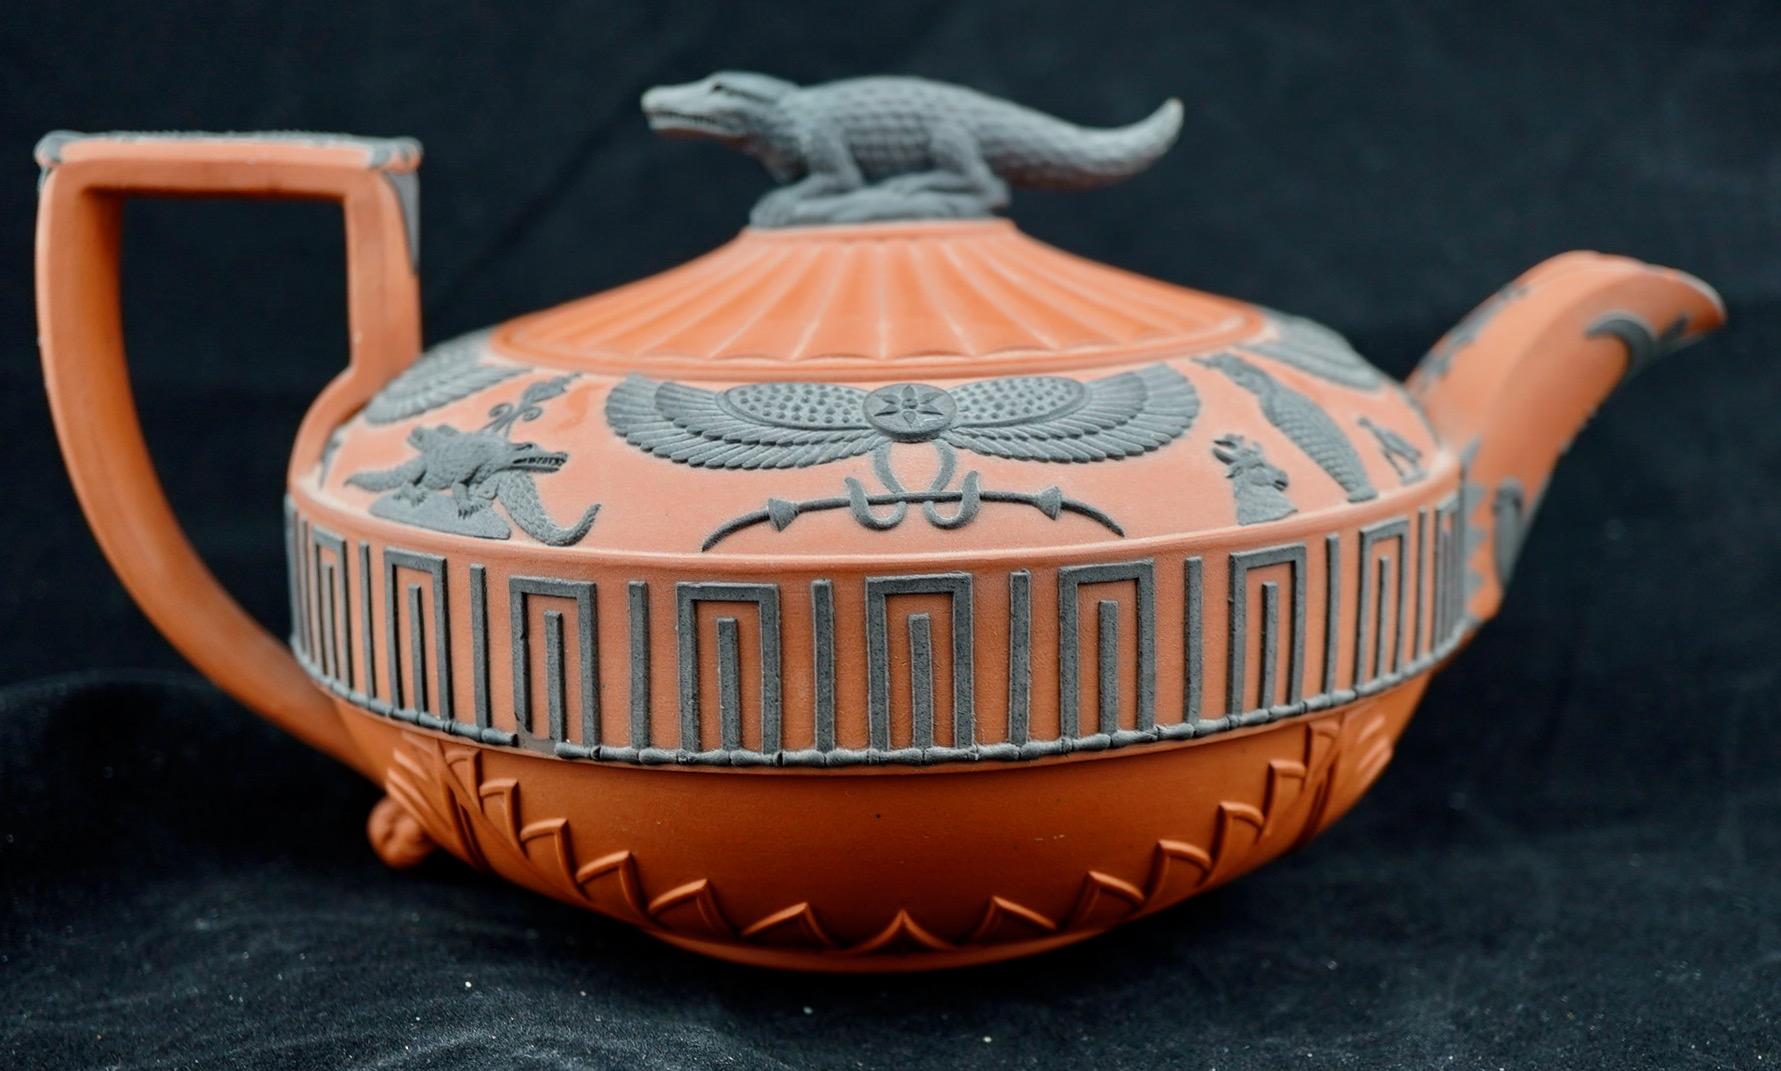 Wedgwood Rosso Antico Egyptian Revival Teapot. The teapot surmounted by figural black crocodile finial, radiating ribbed lid, body decorated with Egyptian motifs including winged sphinxes, crocodiles, burial jars, animals, keyed border to waist,